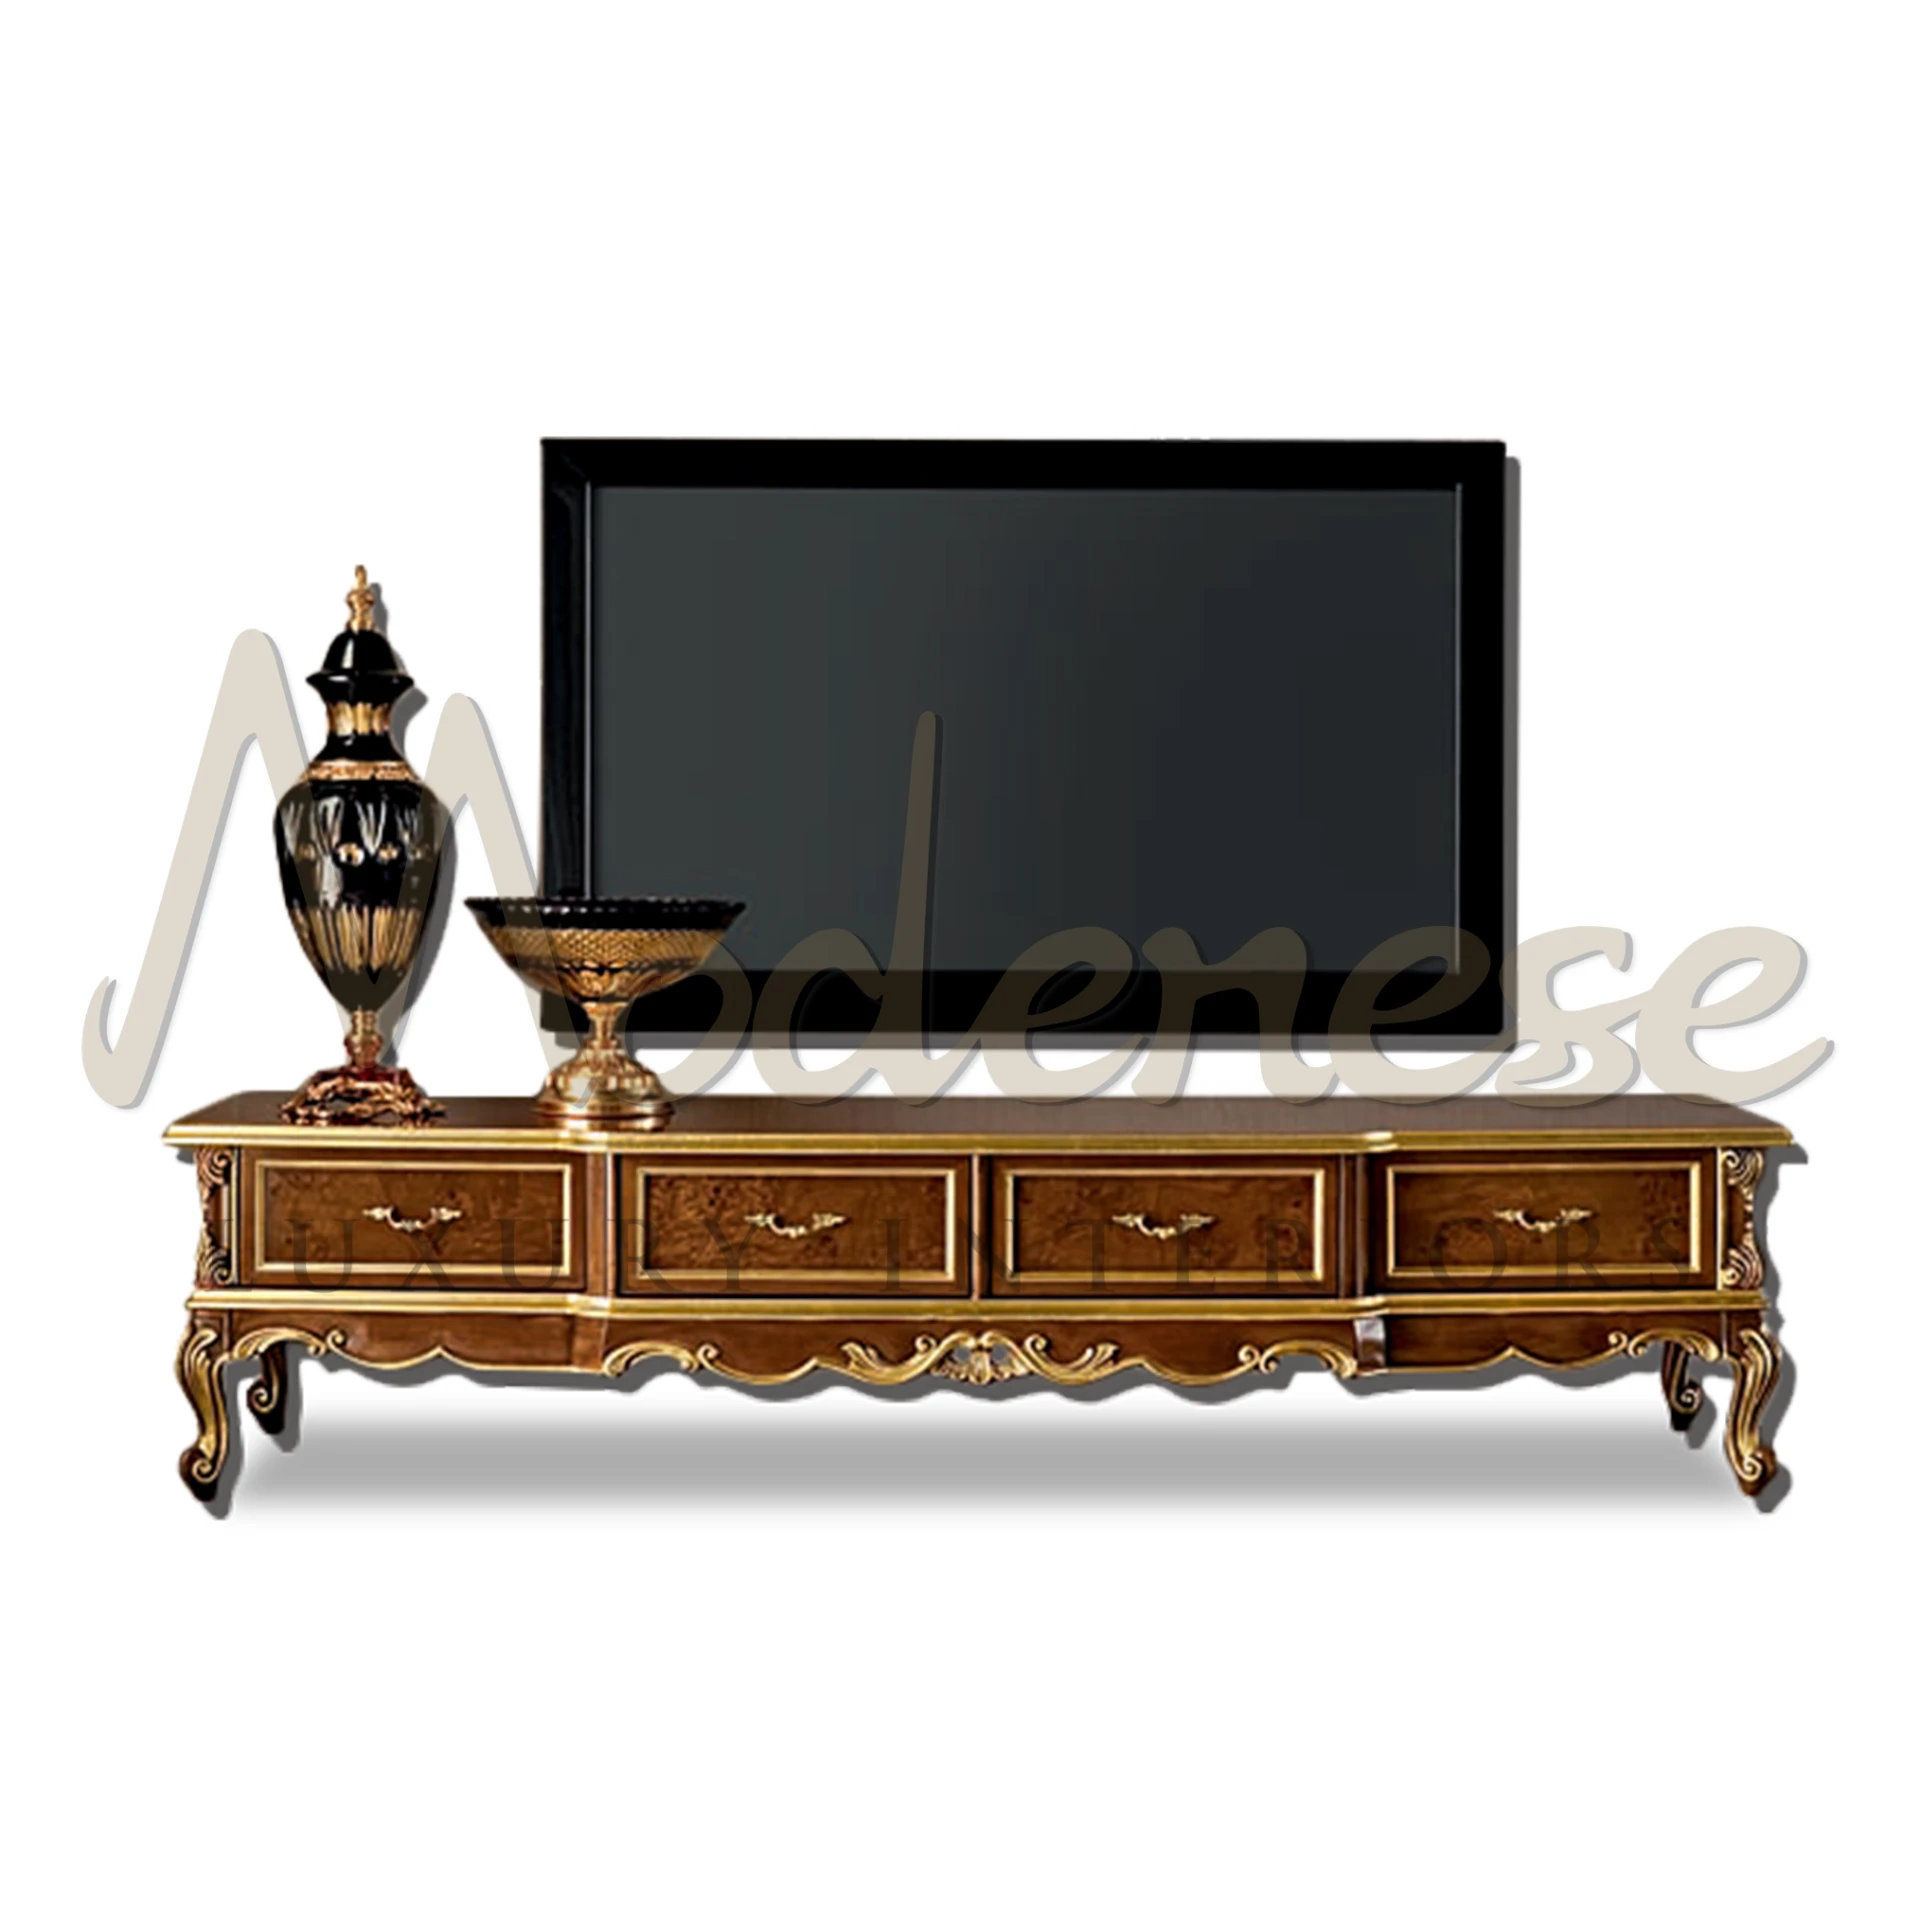 Luxury TV Stand with 4 drawers, adorned with hand-carved details and gold leaf, showcasing Italian craftsmanship.